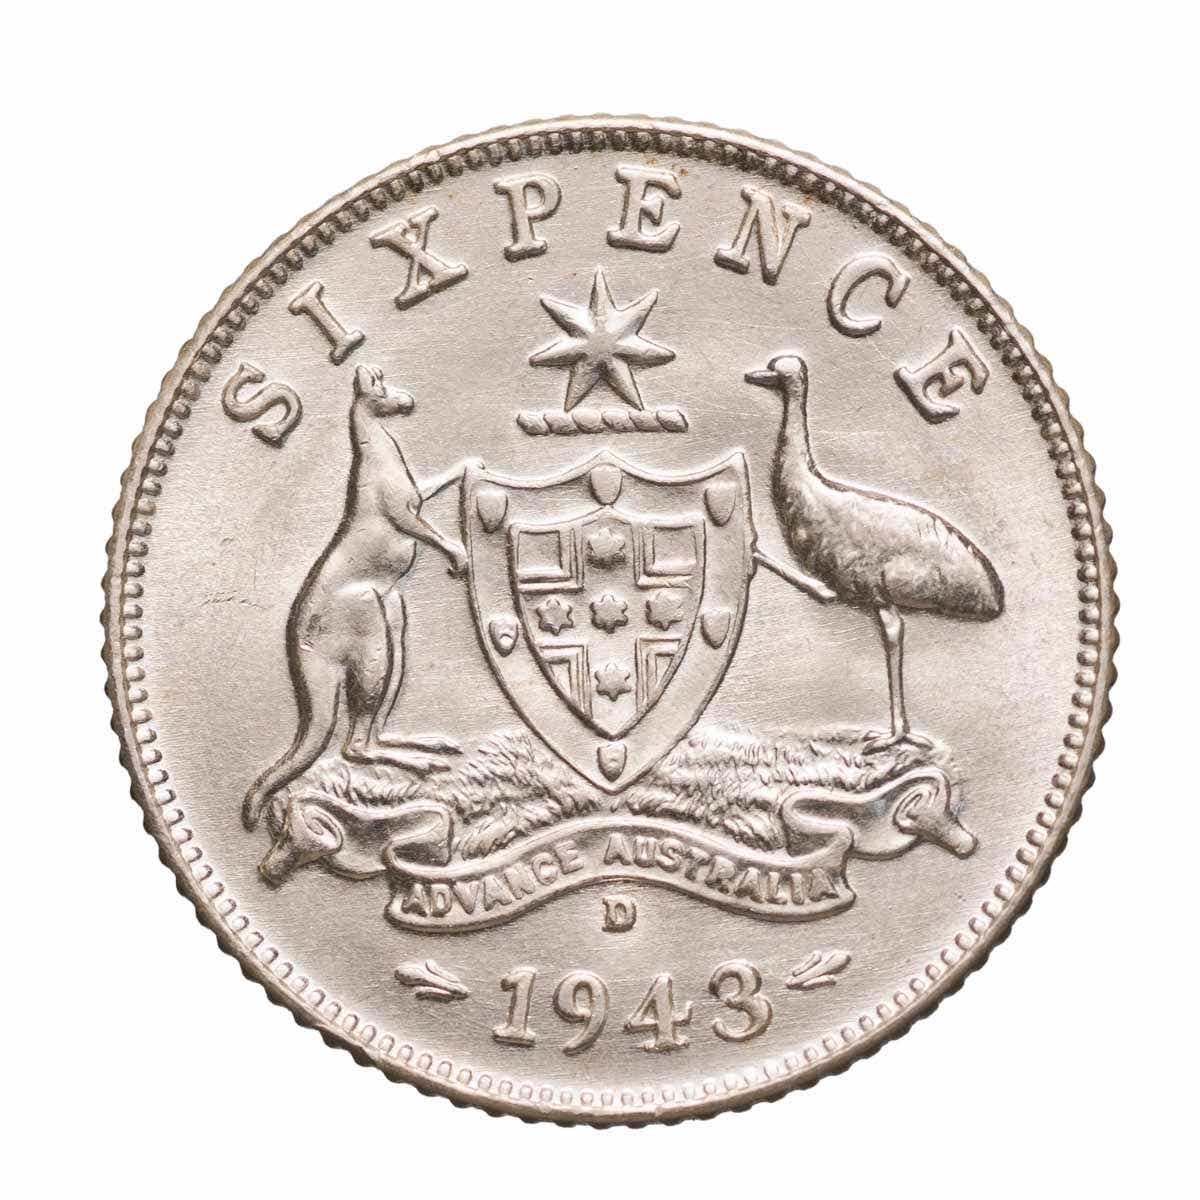 1943D Sixpence Uncirculated